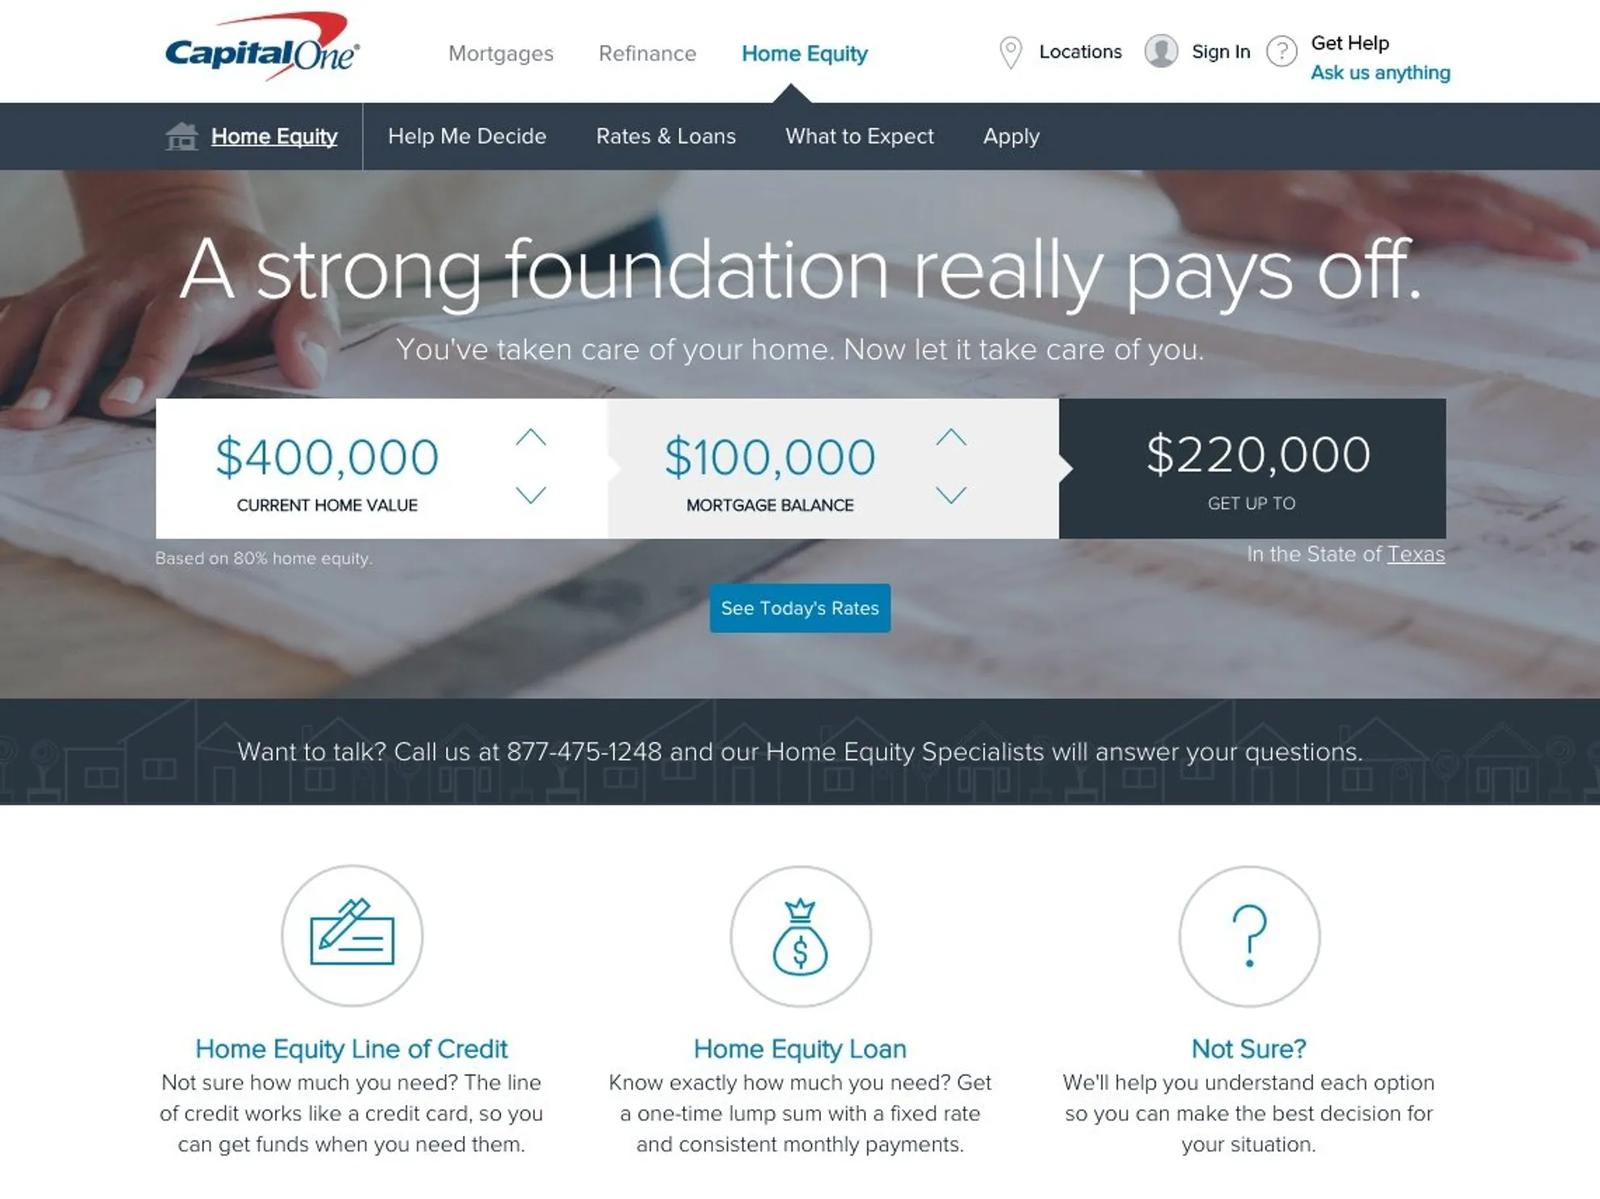 Capital One: Reimagining the Home Equity Web Experience